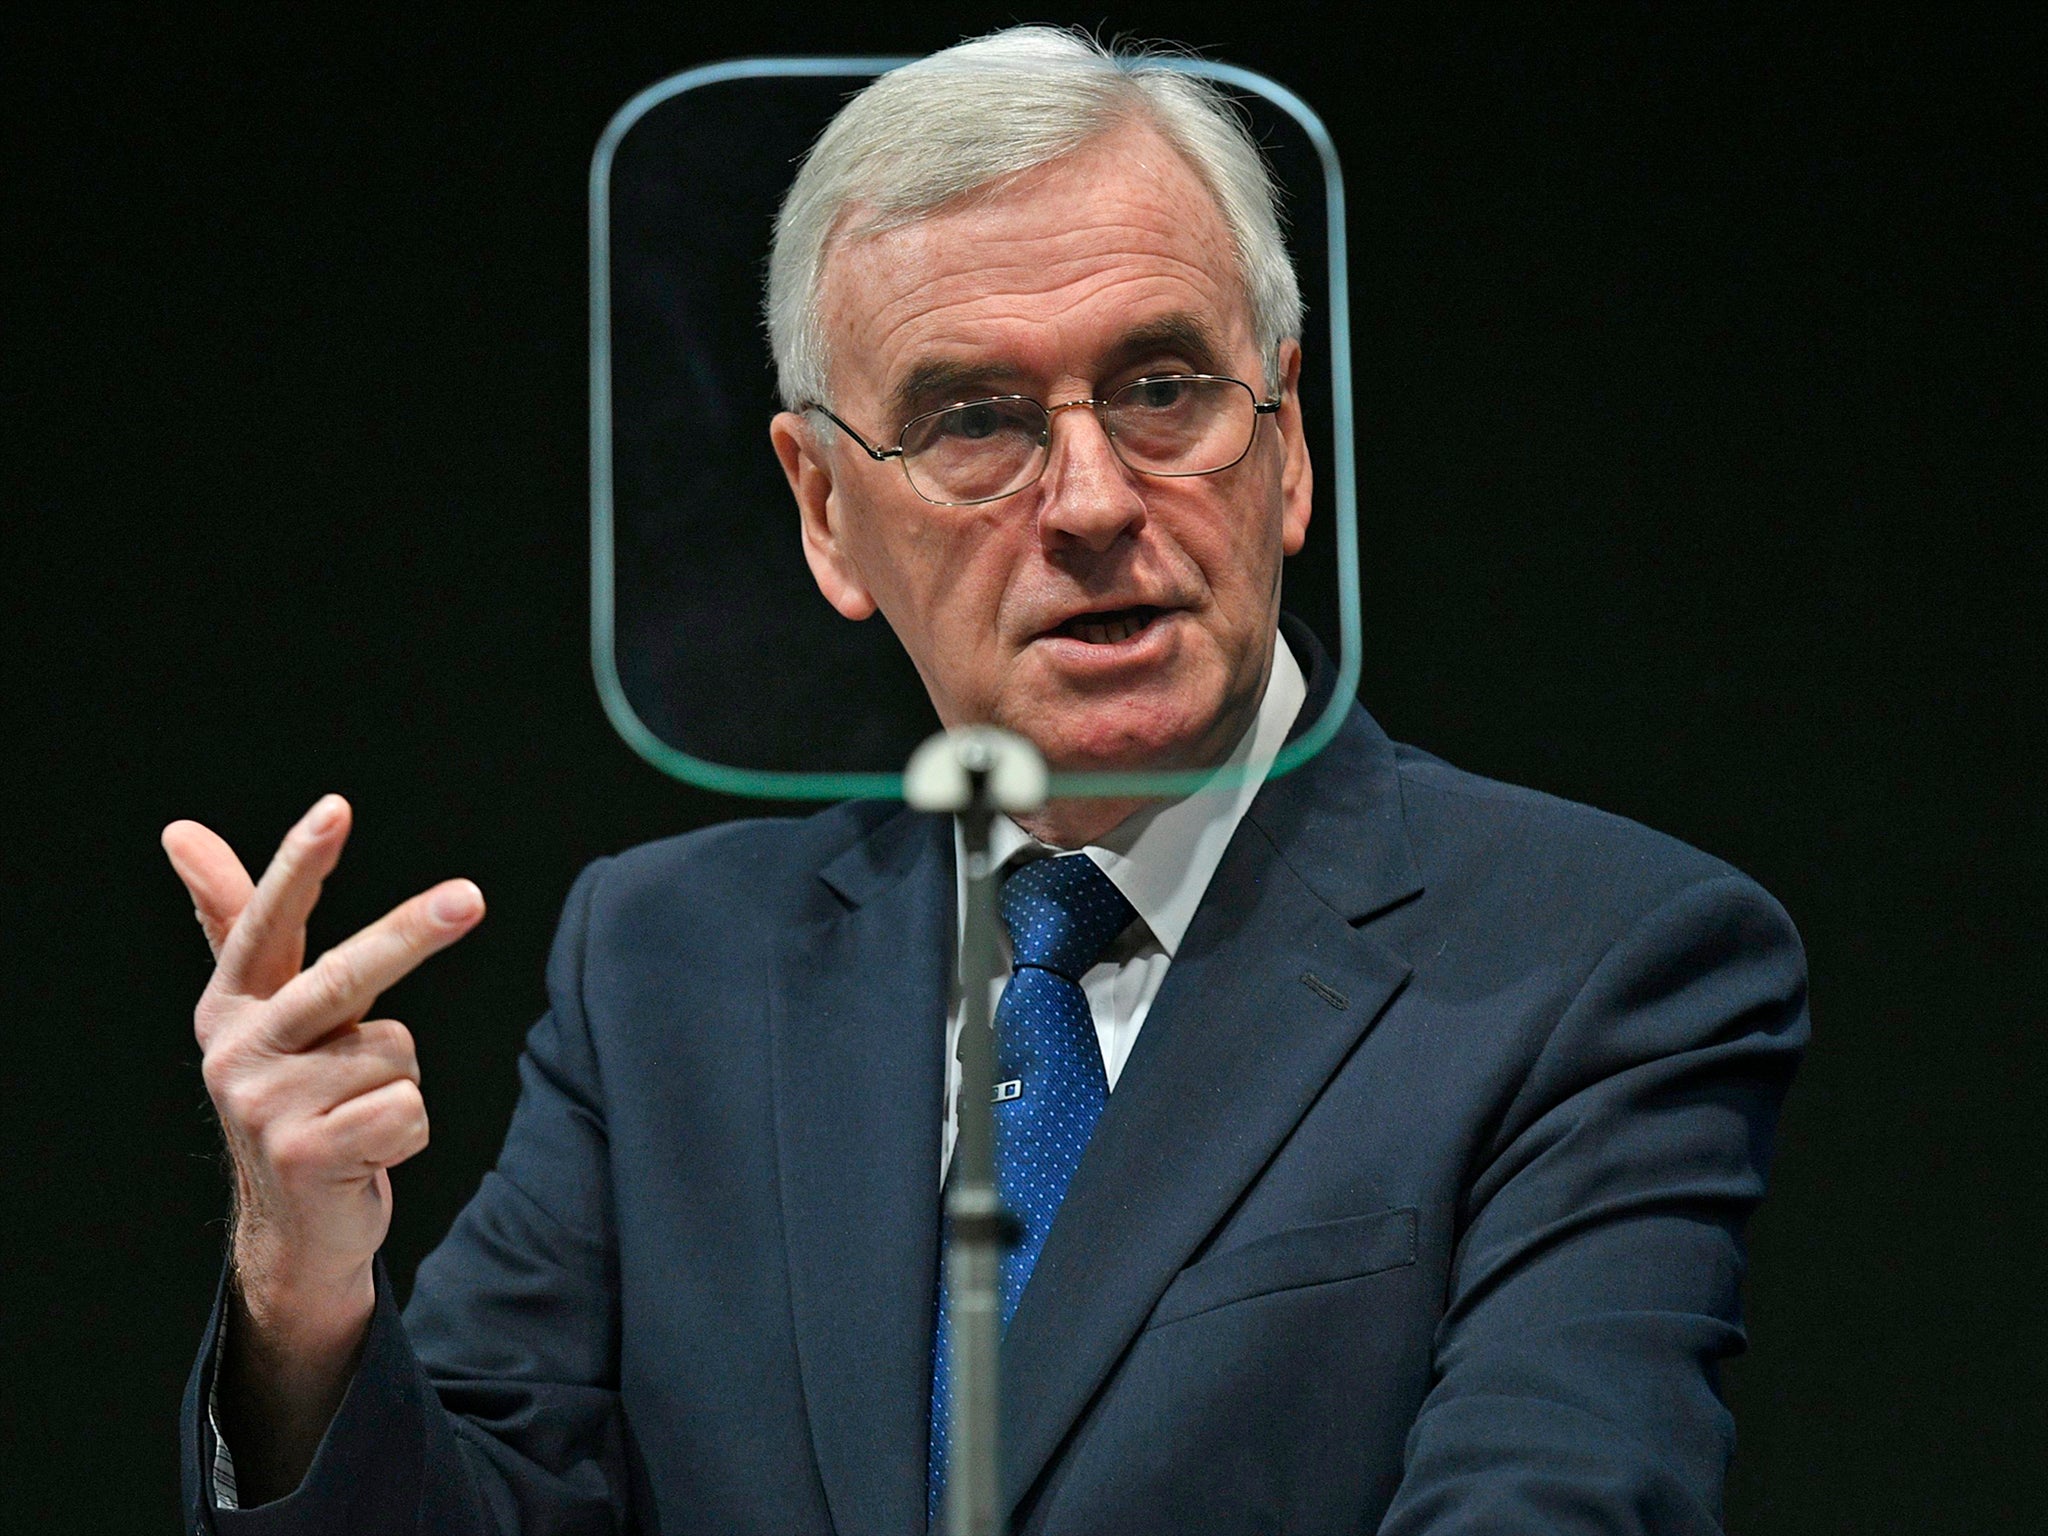 John McDonnell floated the idea of introducing a UBI in his interview with the Independent